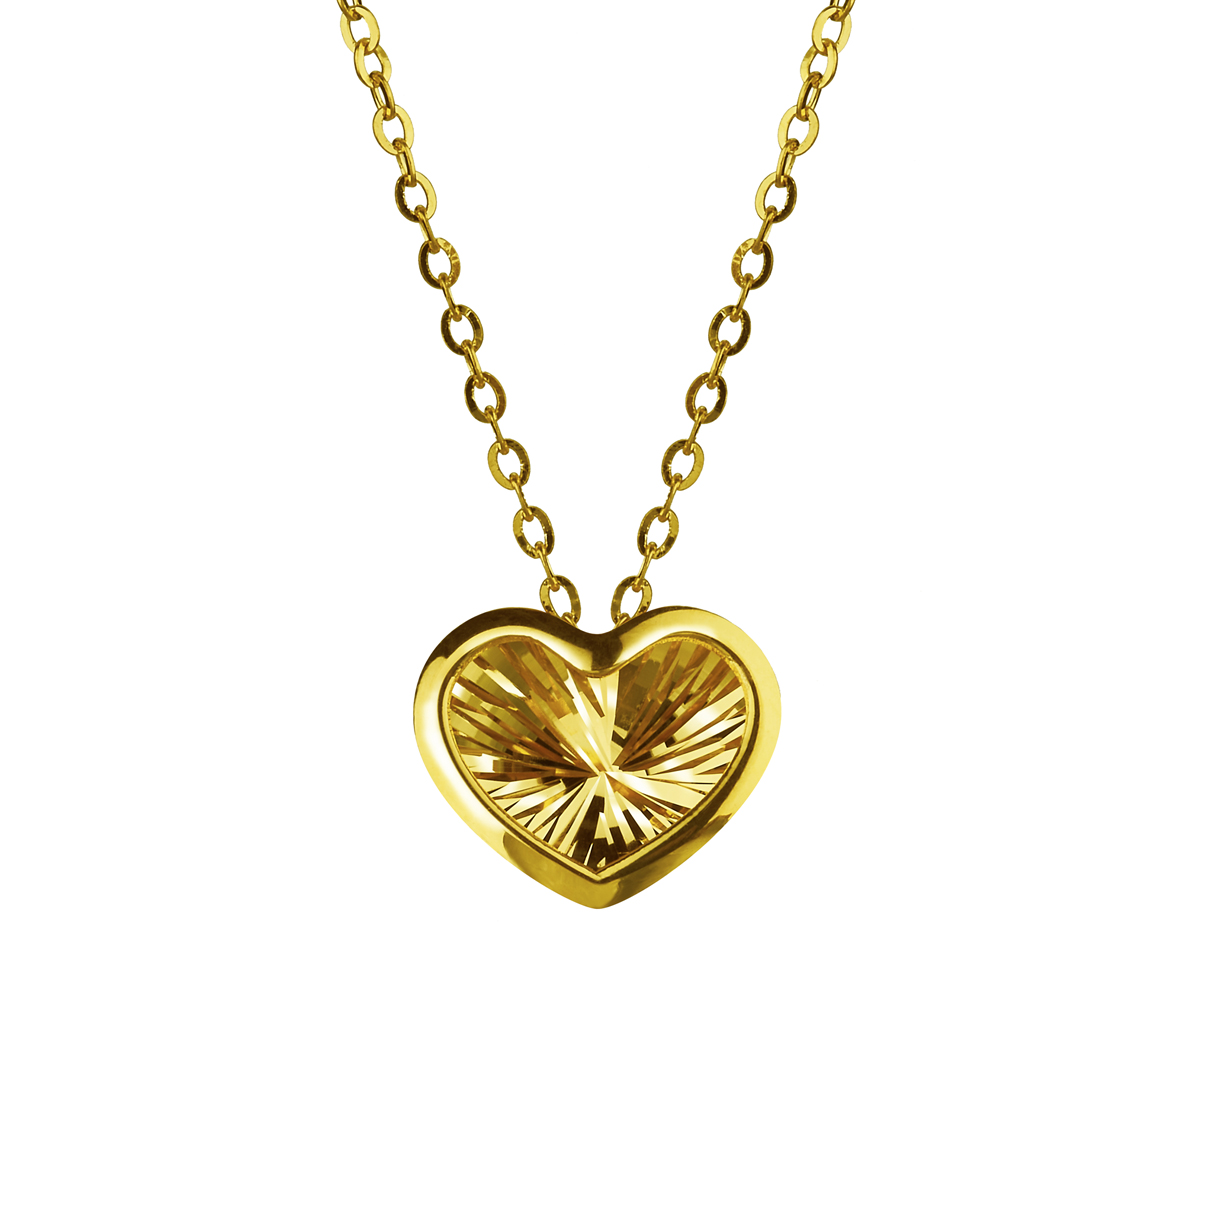 Goldstyle "Knocking Heart" Gold Necklace